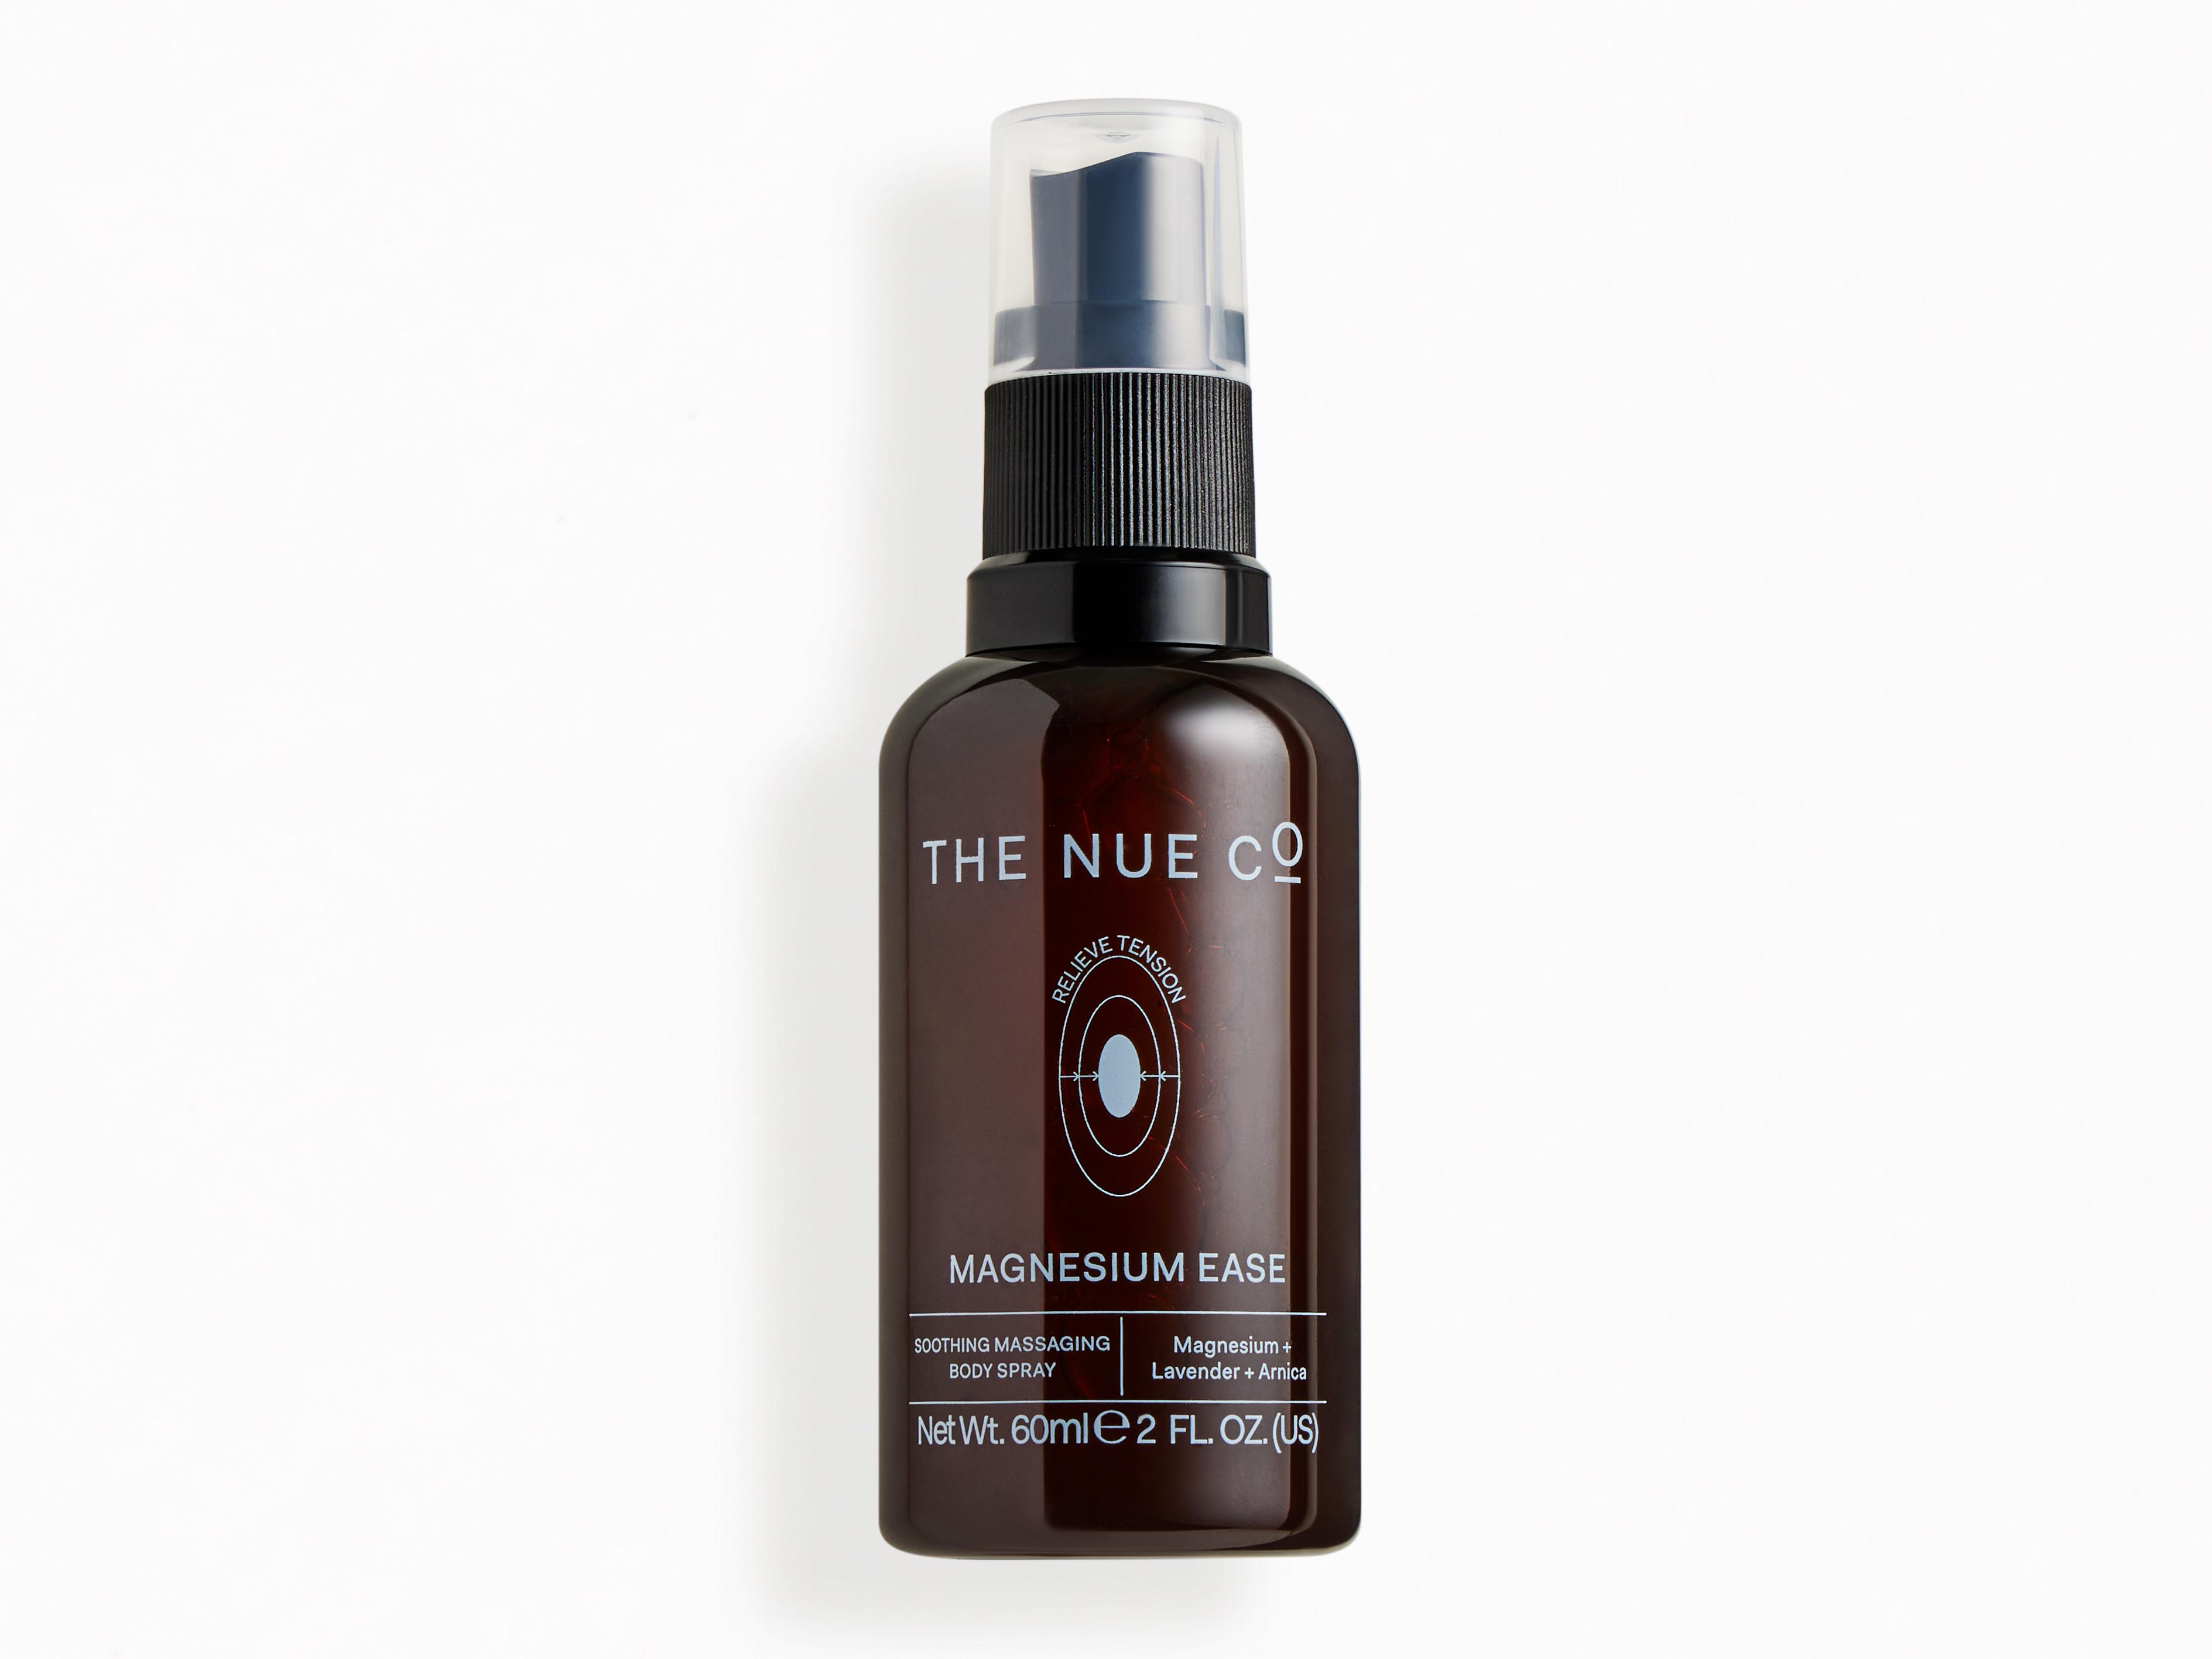 Magnesium Ease by THE NUE CO | Skin | Cleanser | Toner | IPSY